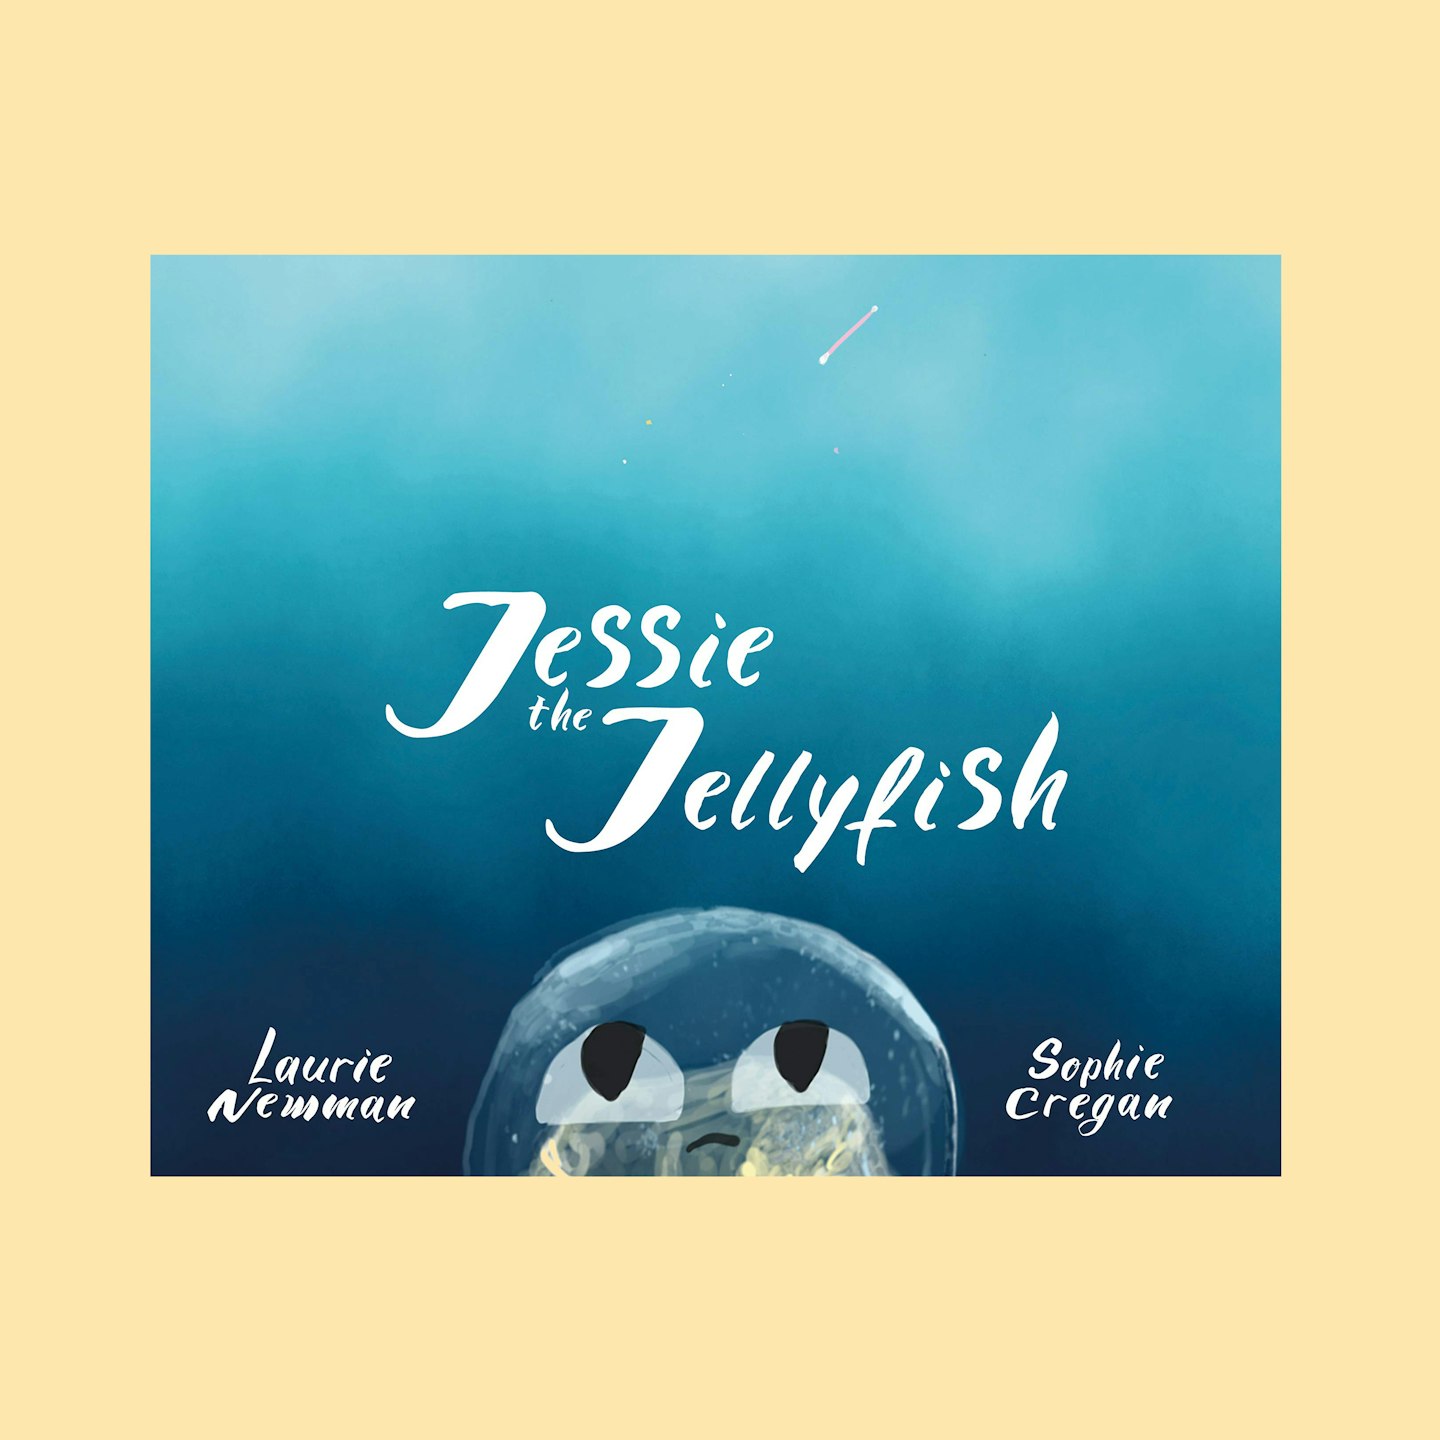 Jessie The Jellyfish by Laurie Newman and Sophie Cregan, £6.99